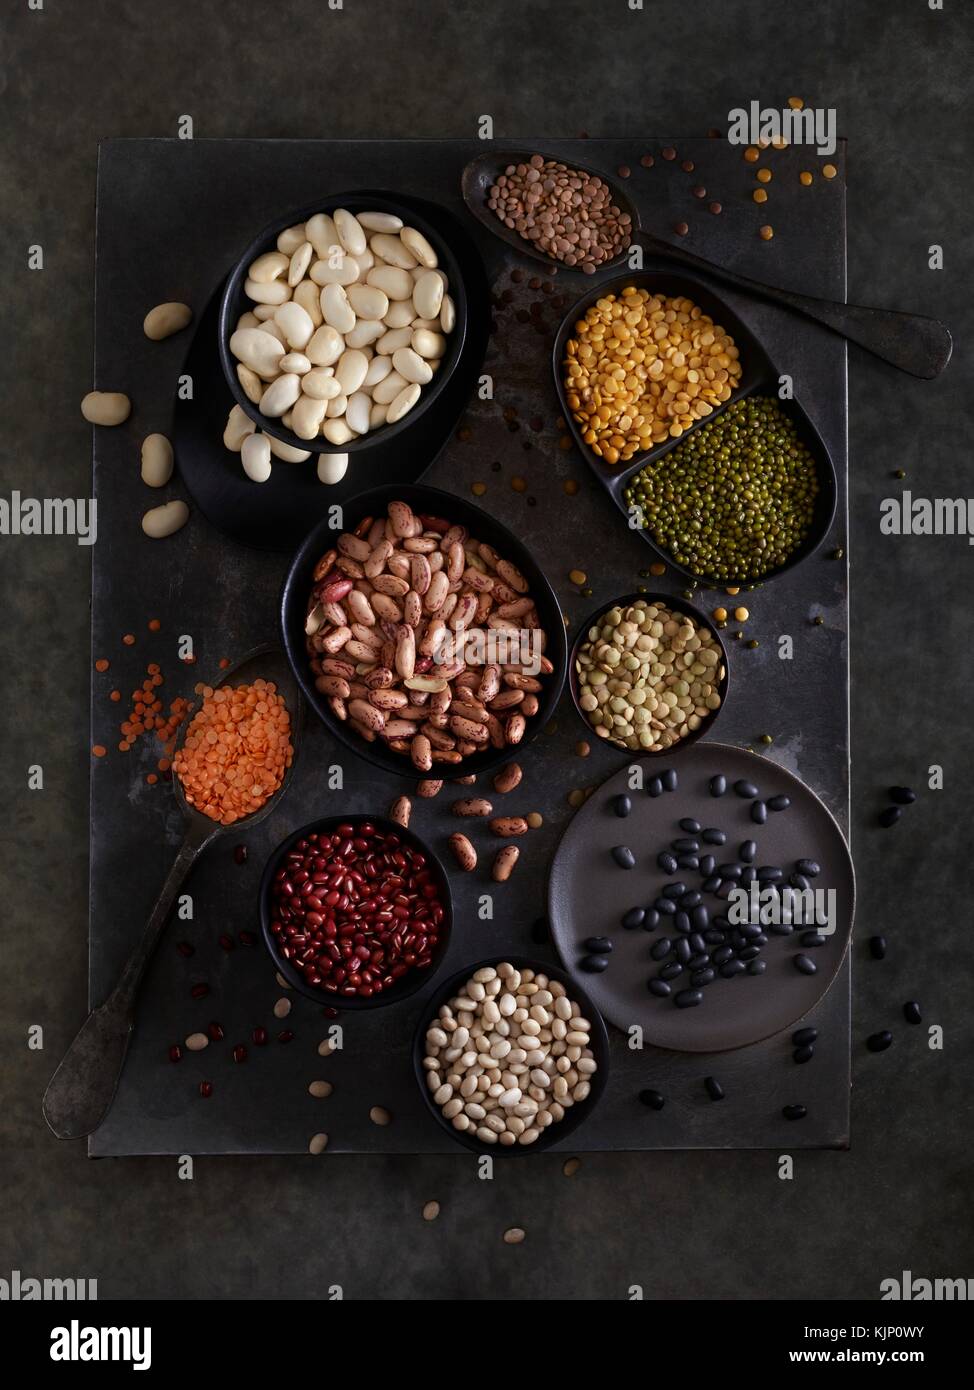 Pulses in bowls against dark background, overhead view. Stock Photo